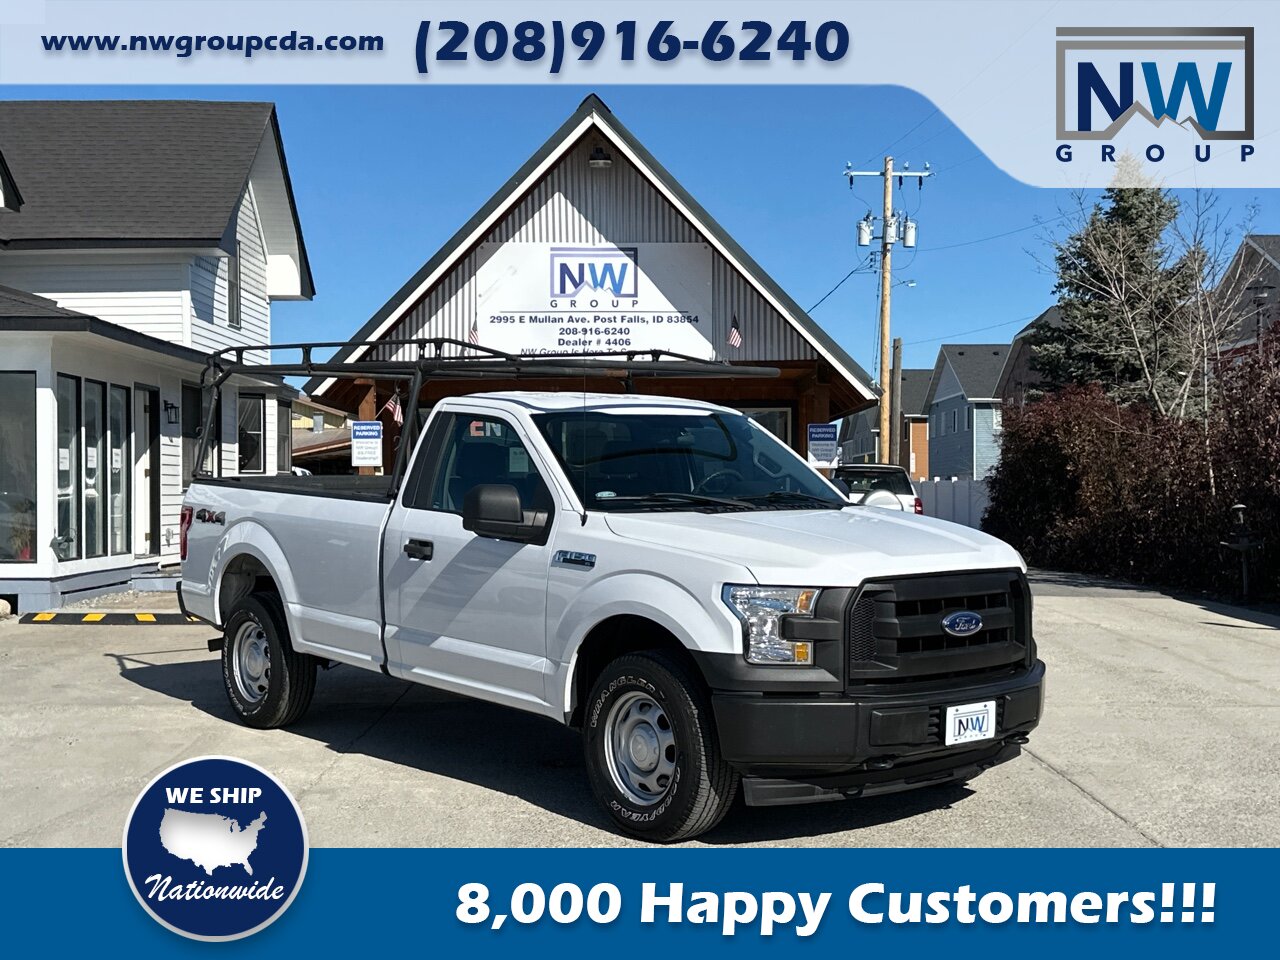 2017 Ford F-150 XL.  5.0L V8, 4x4, Very Rare! Long Bed with Accessory Rack! - Photo 1 - Post Falls, ID 83854